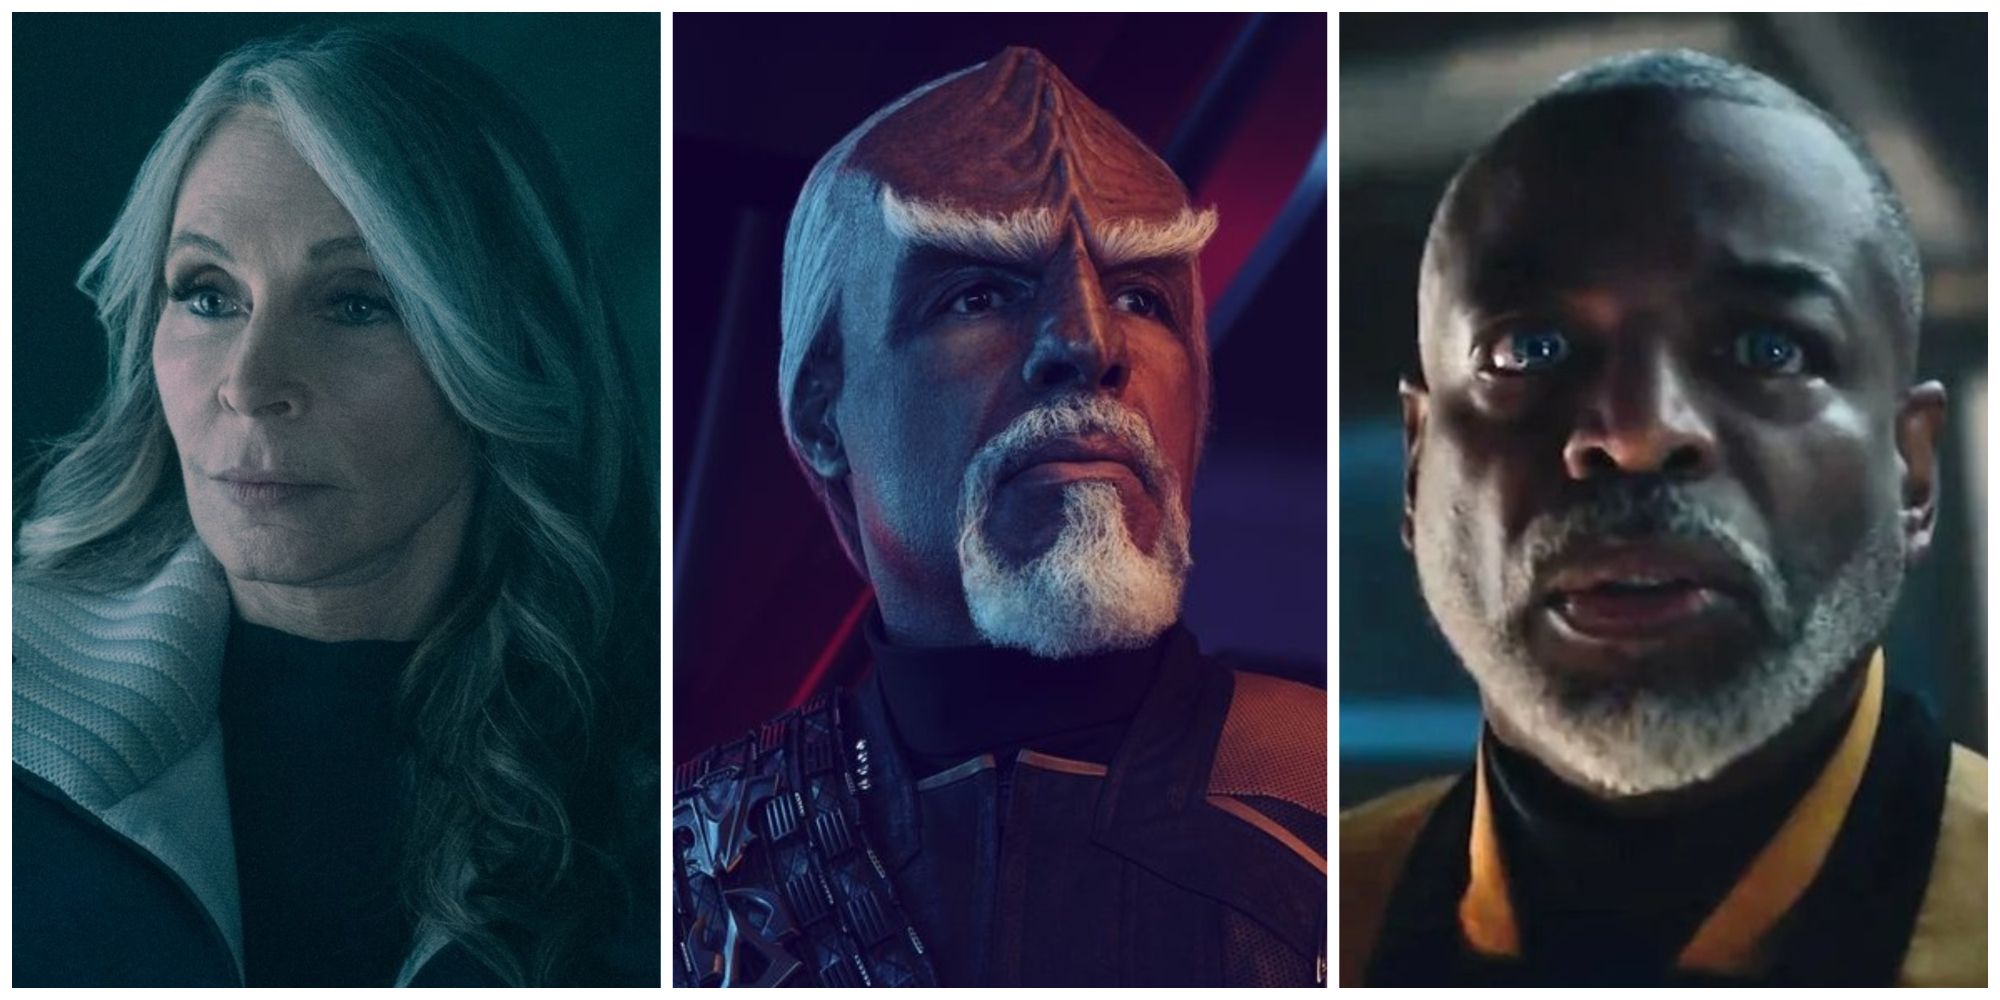 Crusher, Worf and La Forge from Star Trek: Picard